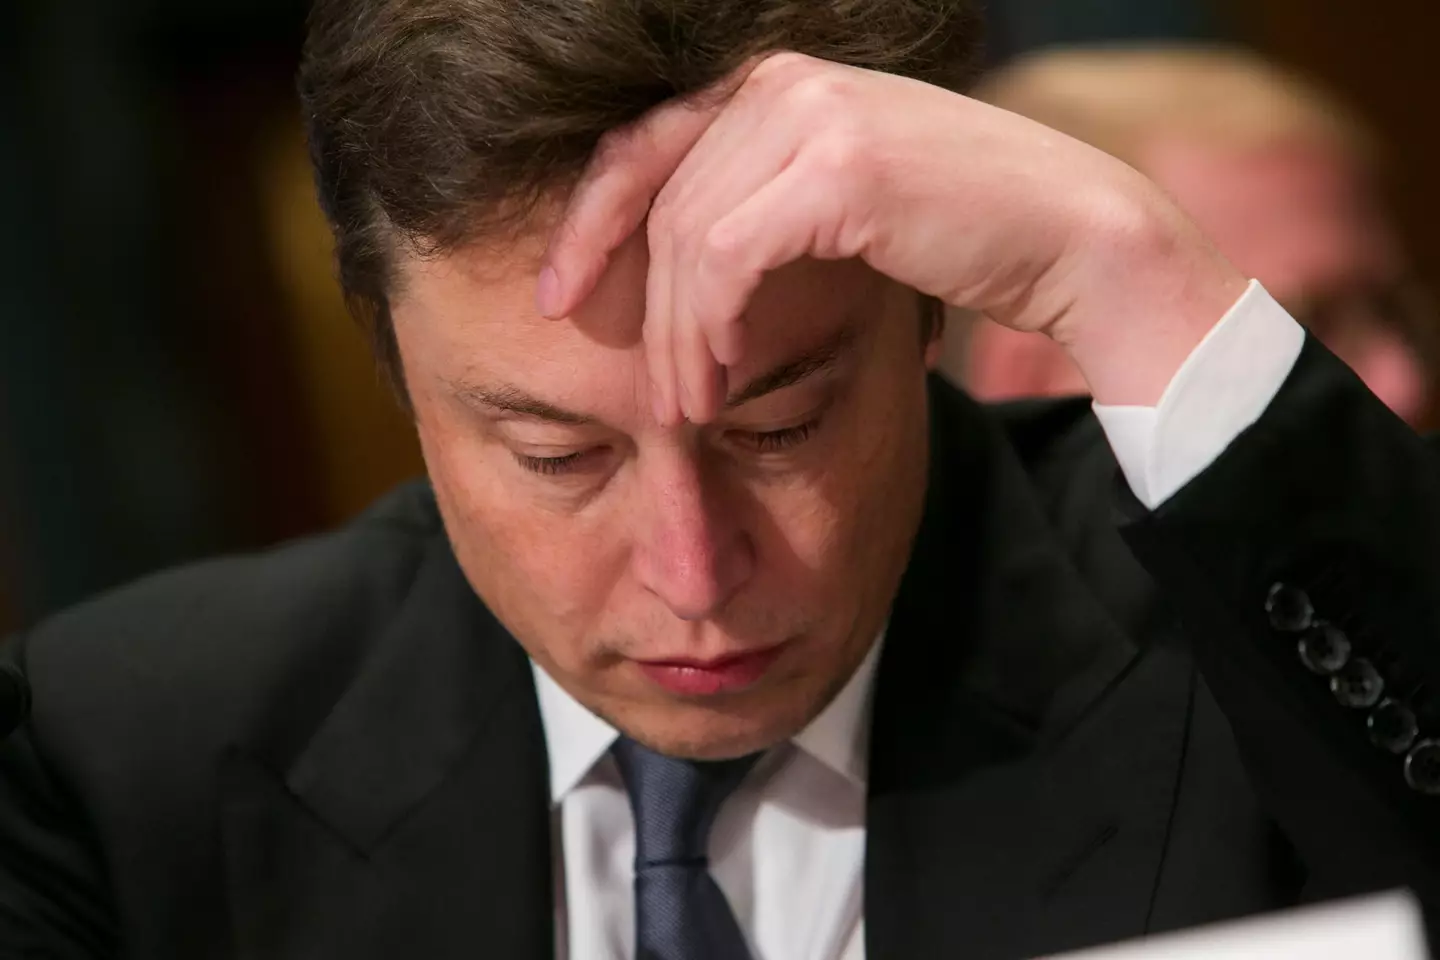 Elon Musk has been accused of 'expos[ing] his genitals' to a SpaceX flight attendant.